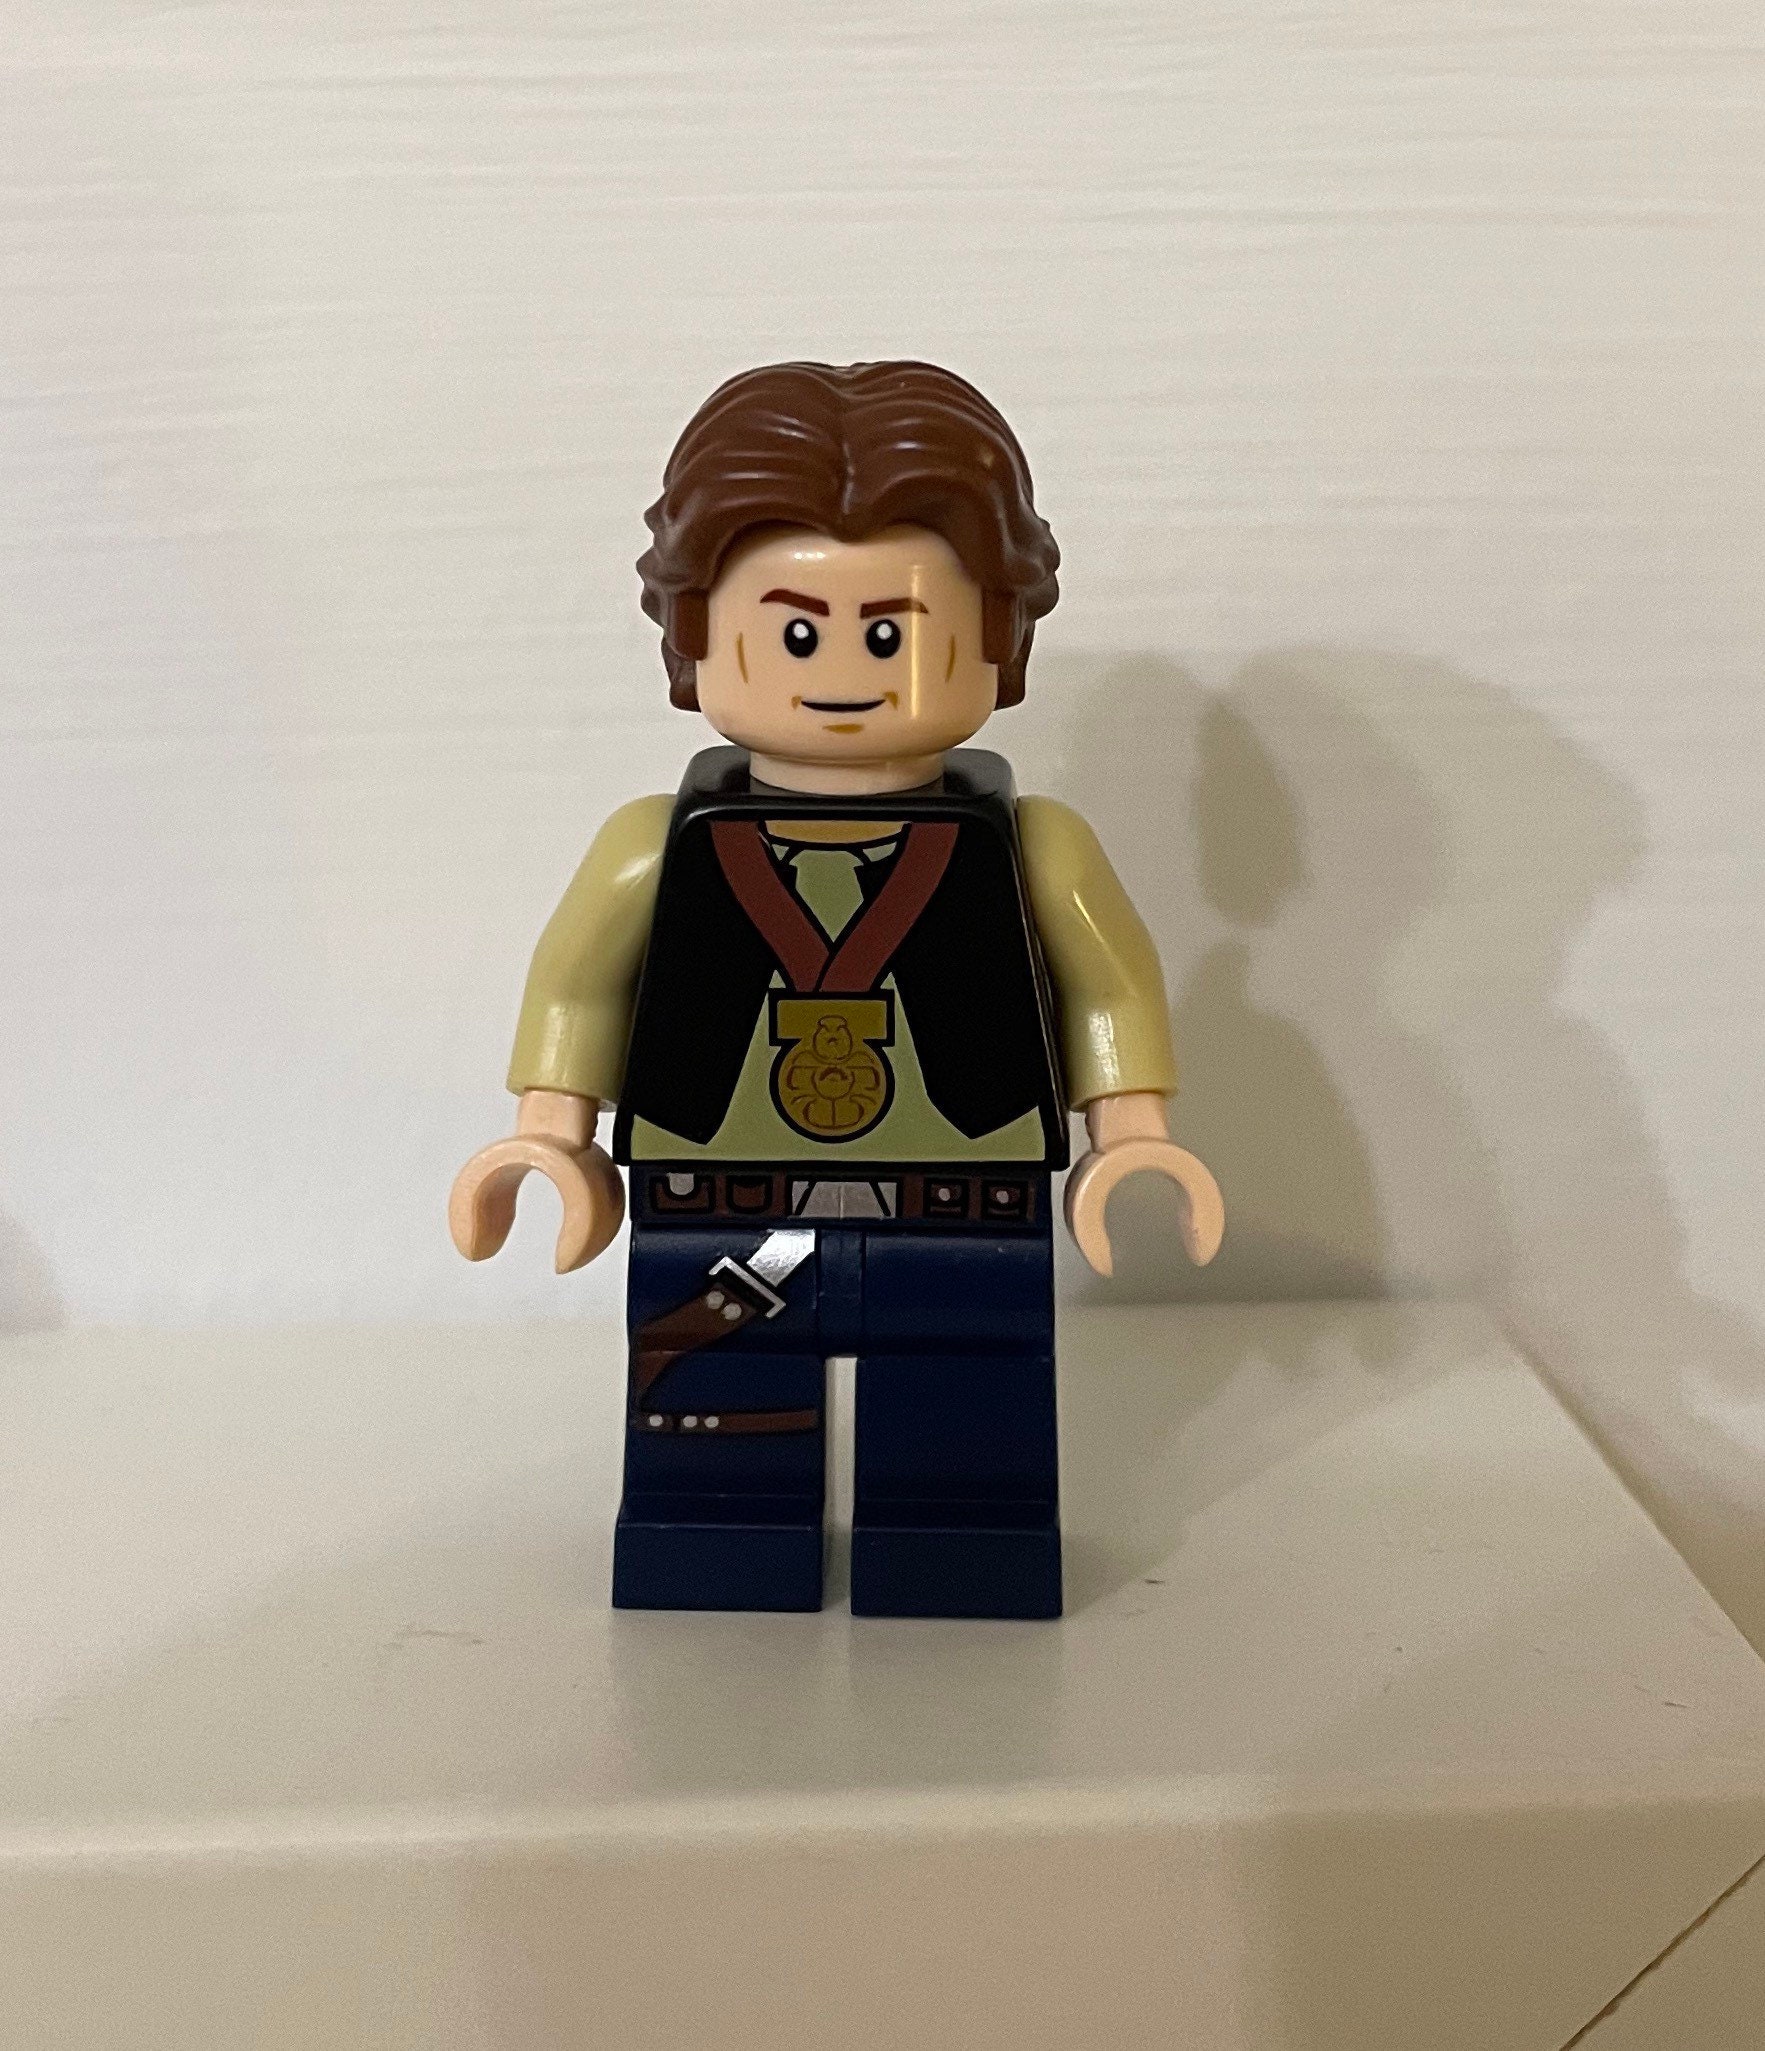 LEGO STAR WARS MINIFIGURES-HAN SOLO medalled 